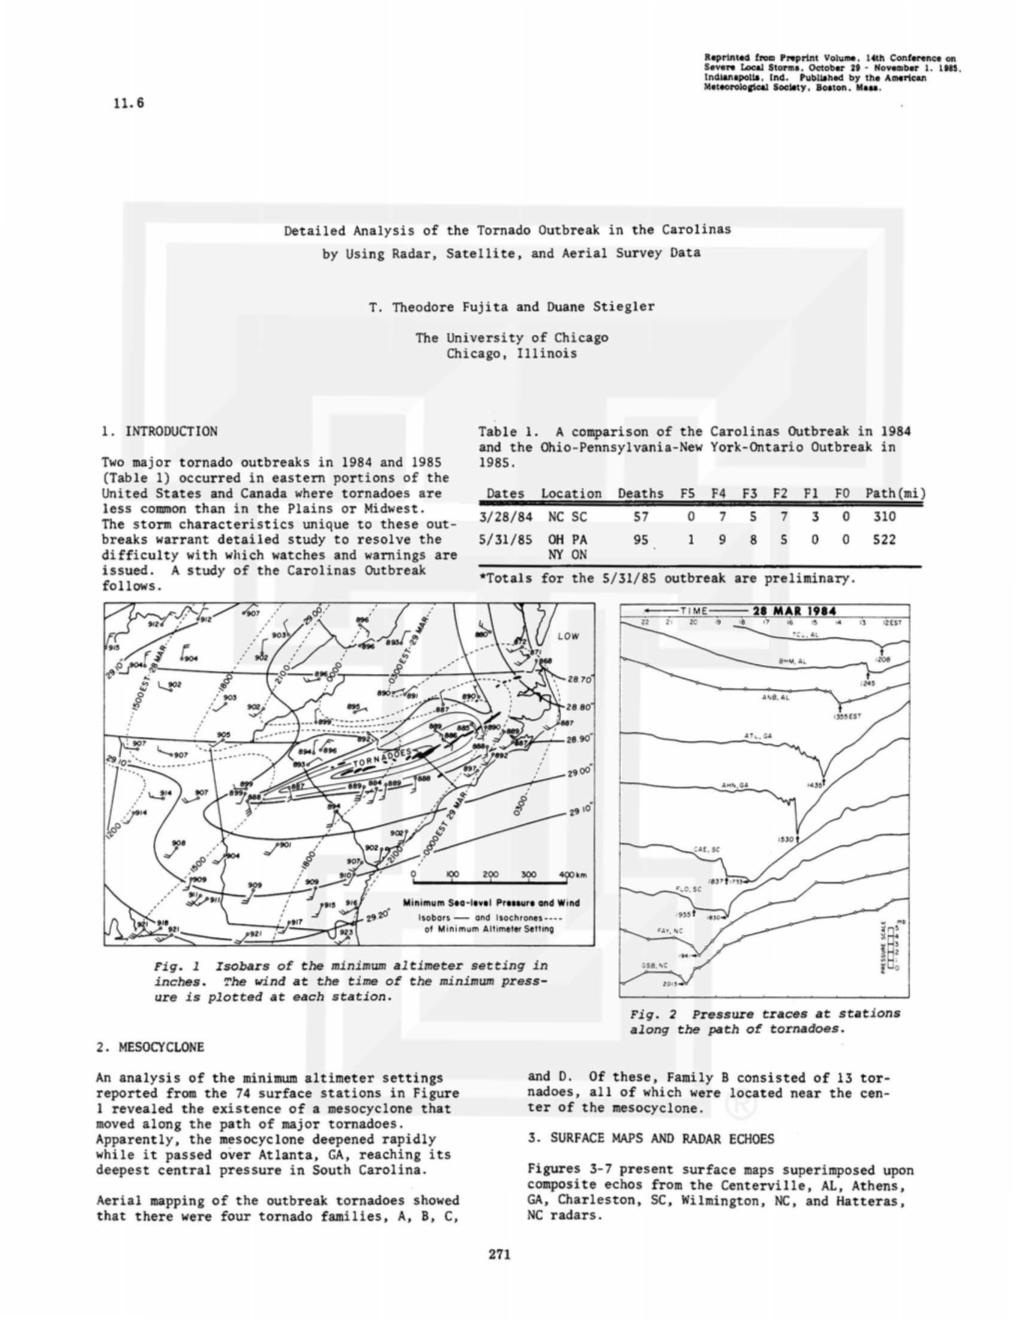 11. 6 Detailed Analysis of the Tornado Outbreak in the Carolinas by Using